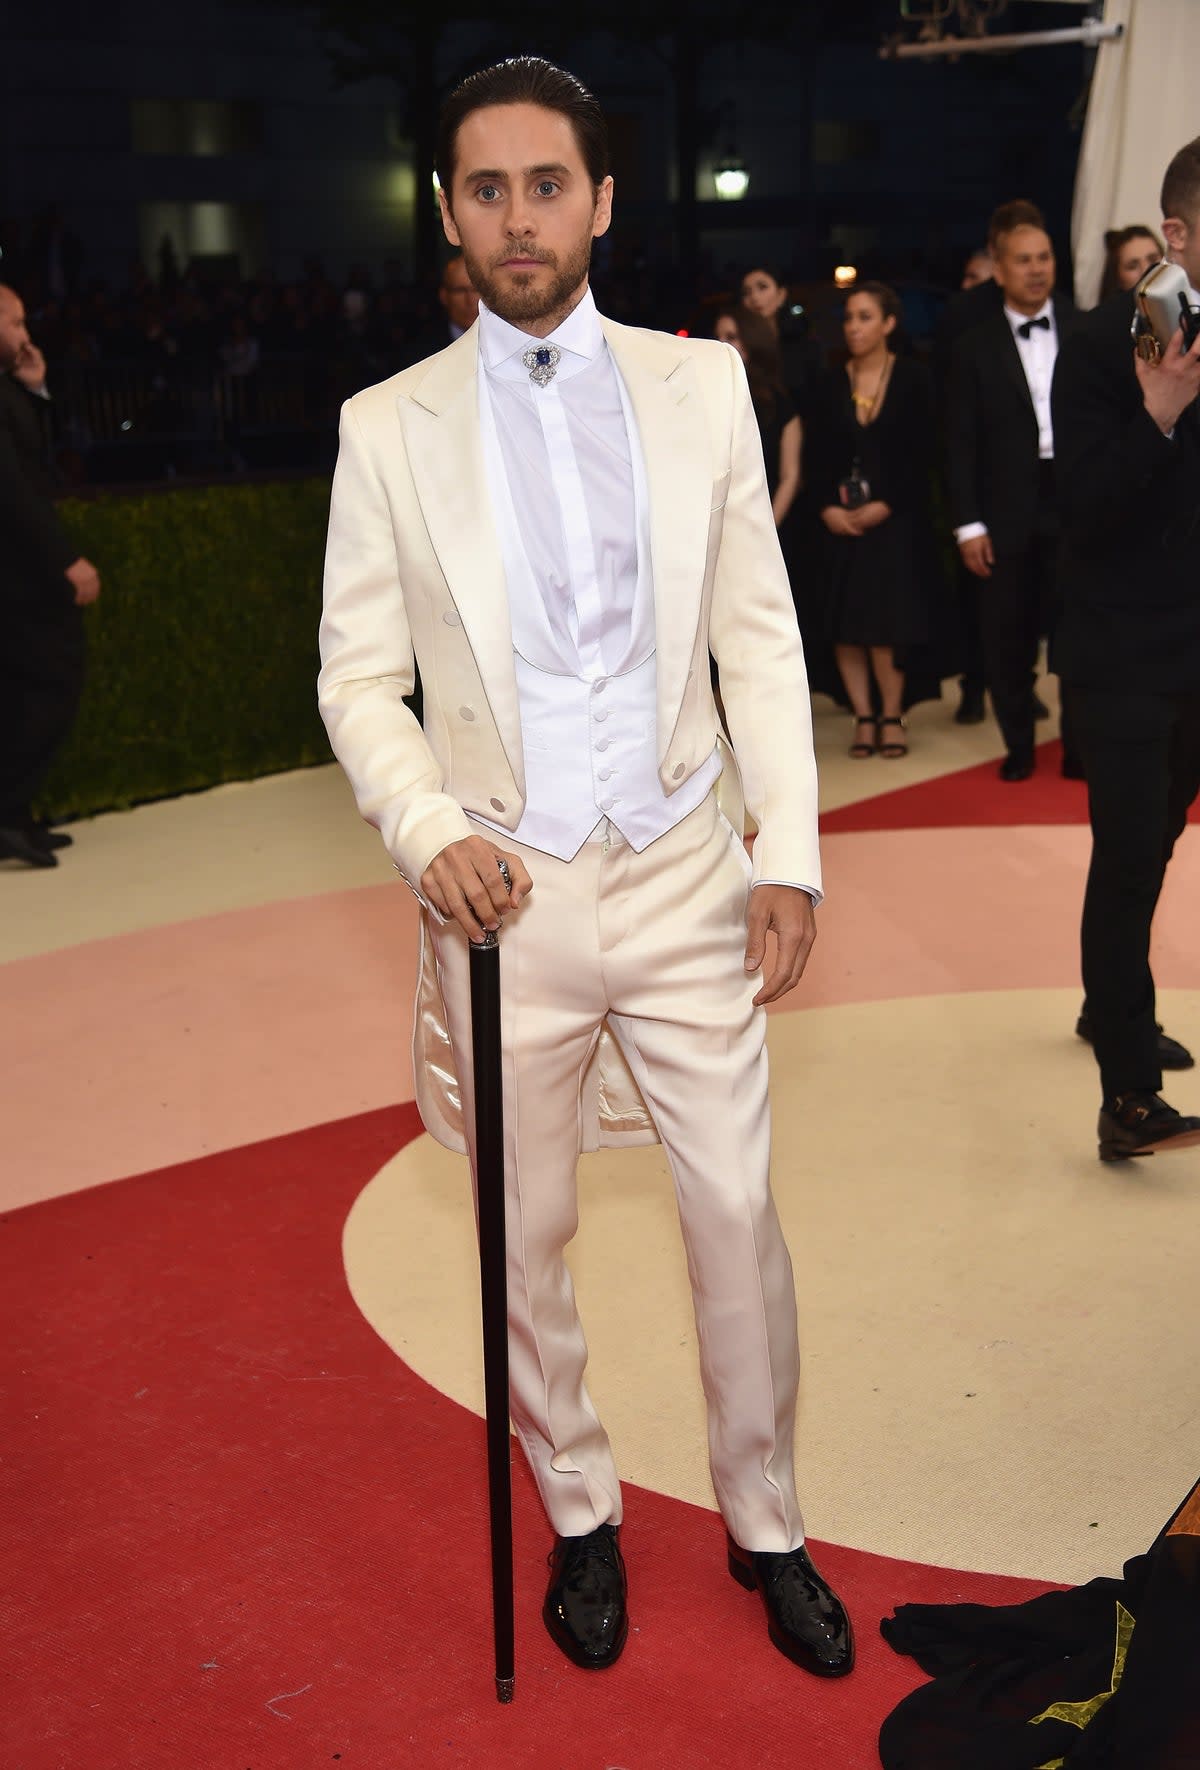 Jared Leto at the 2016 Met Gala (Getty Images)